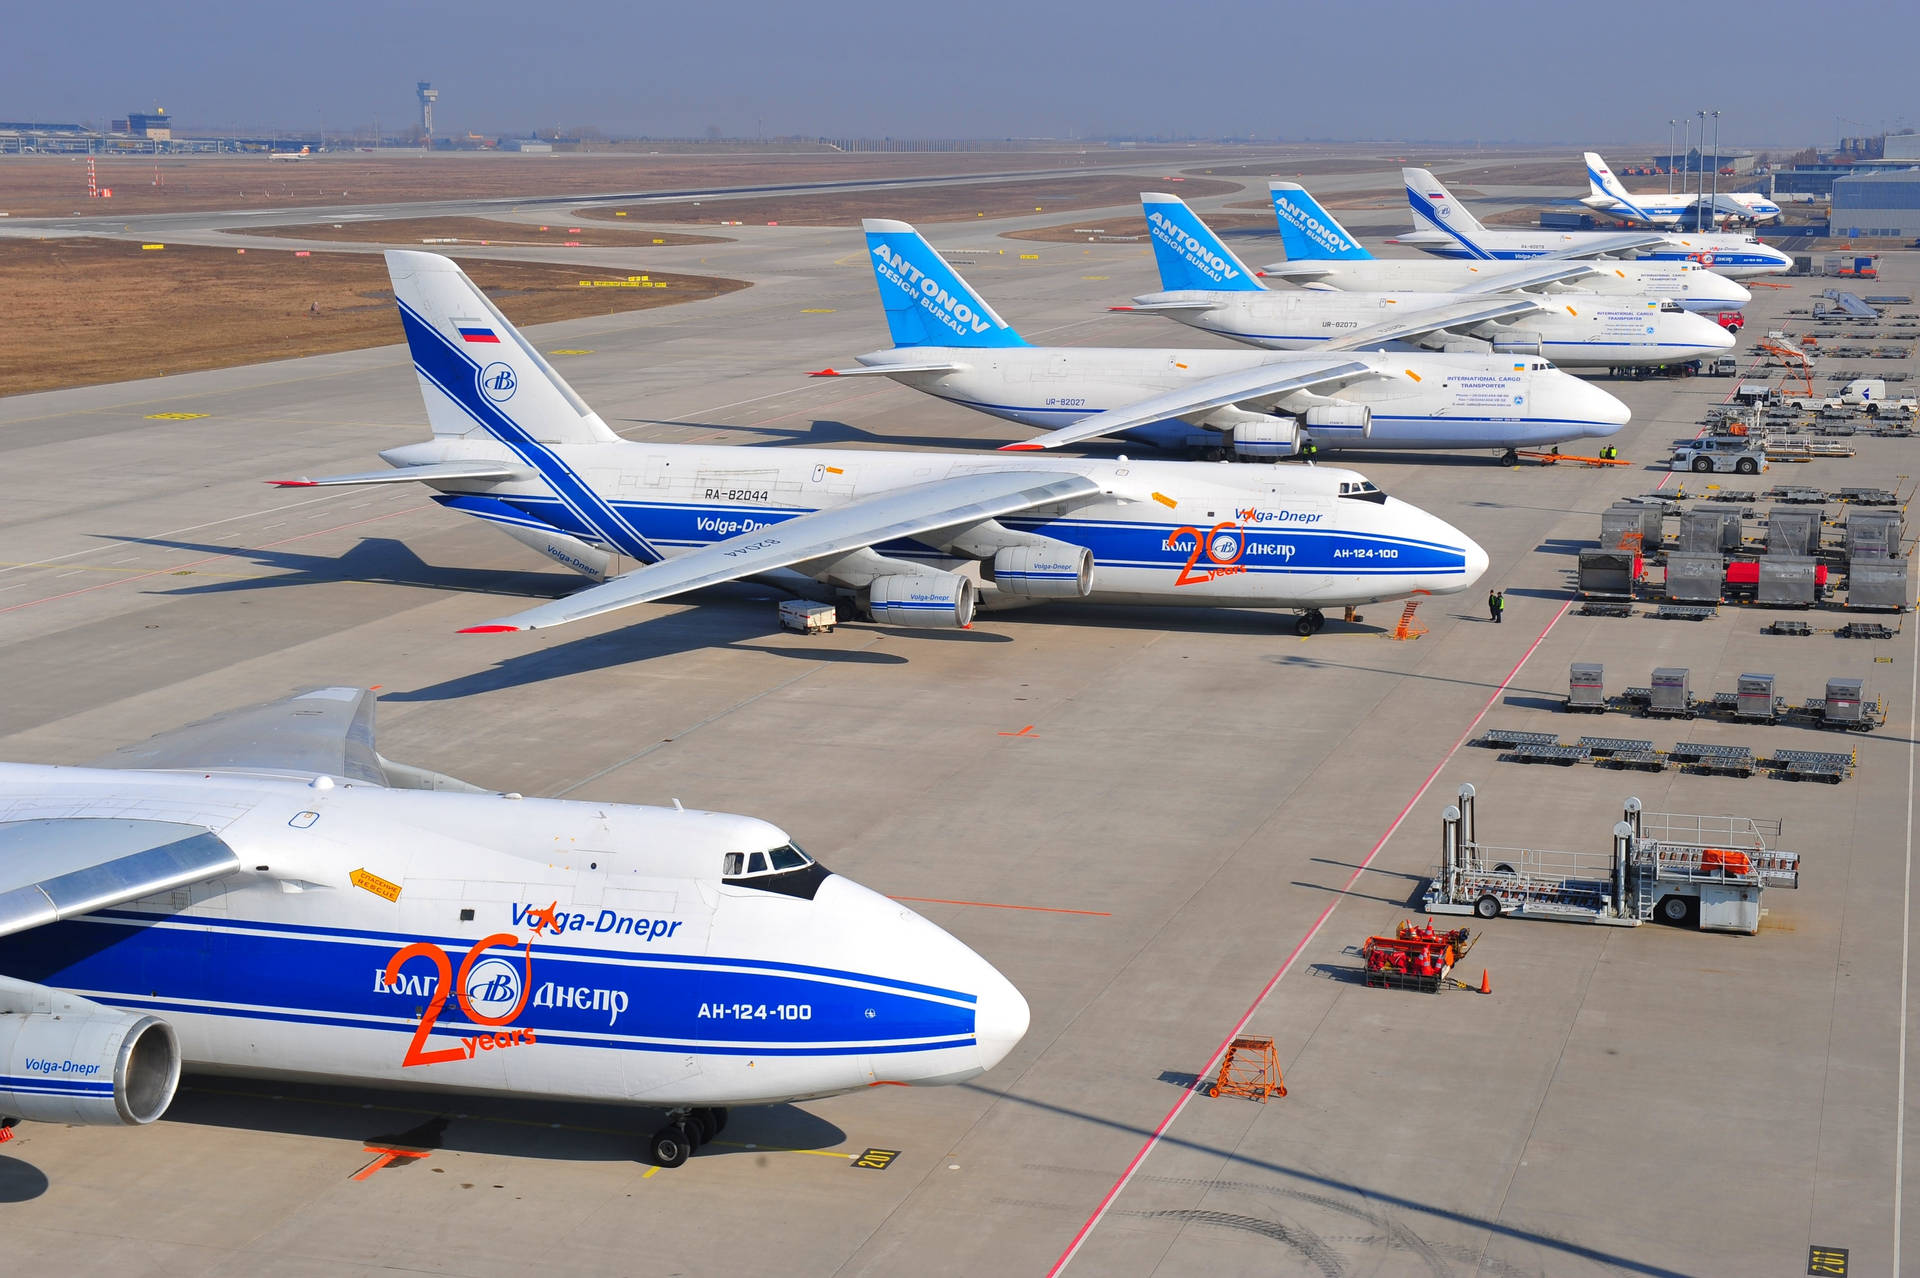 Russian Planes At The Airport